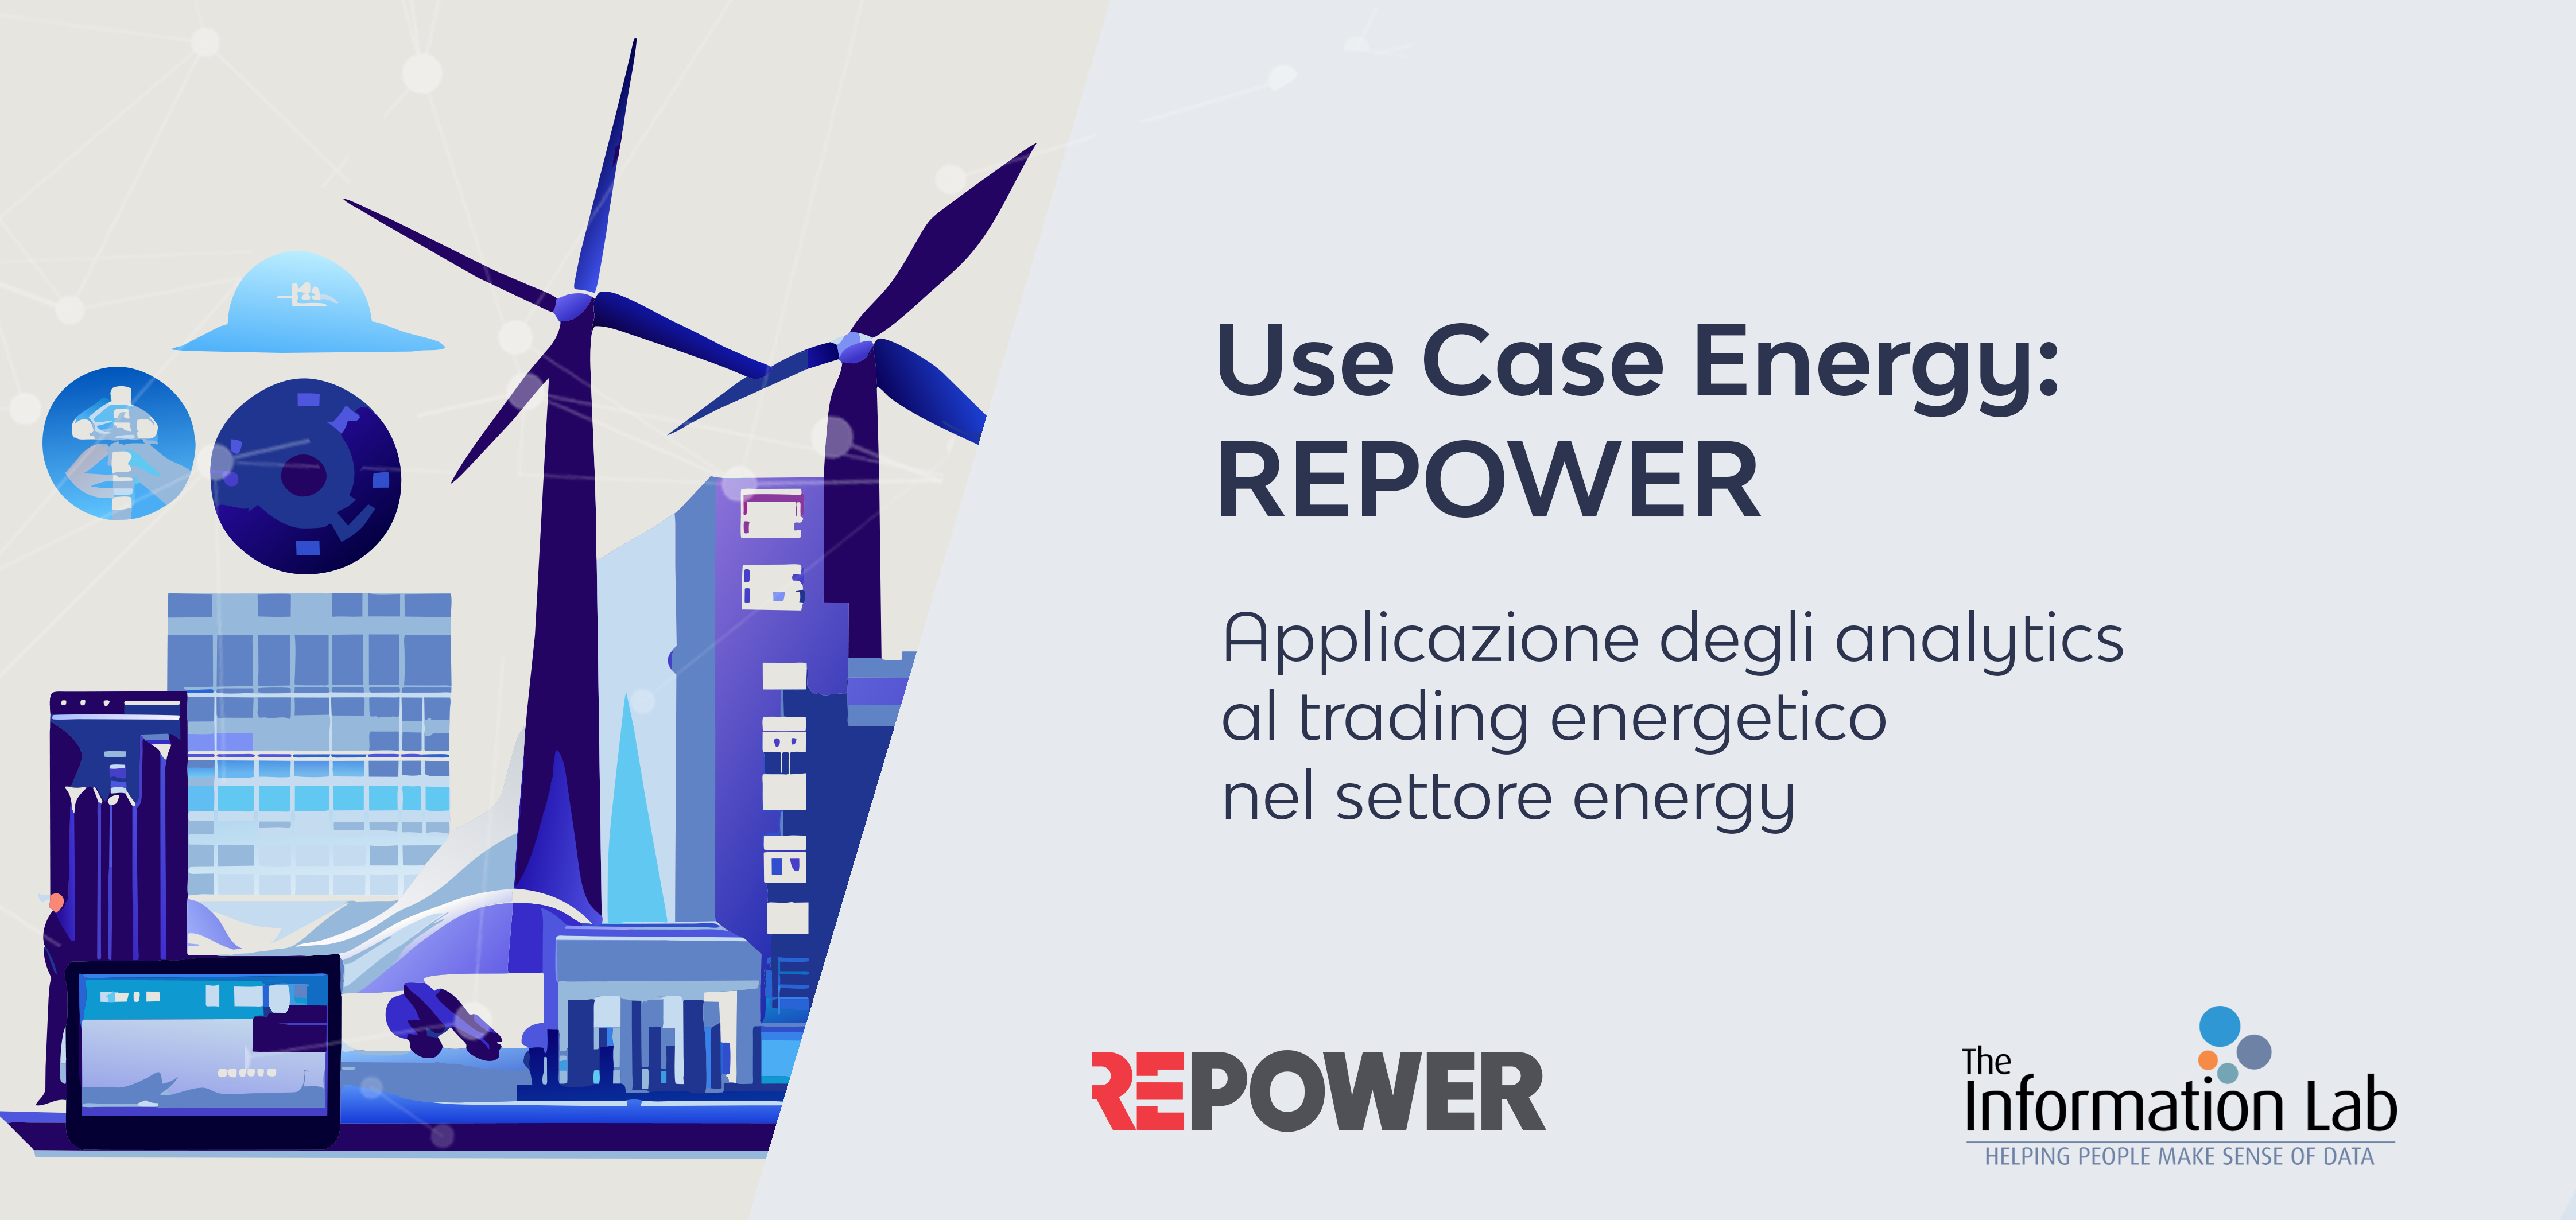 Use Case Energy: Repower